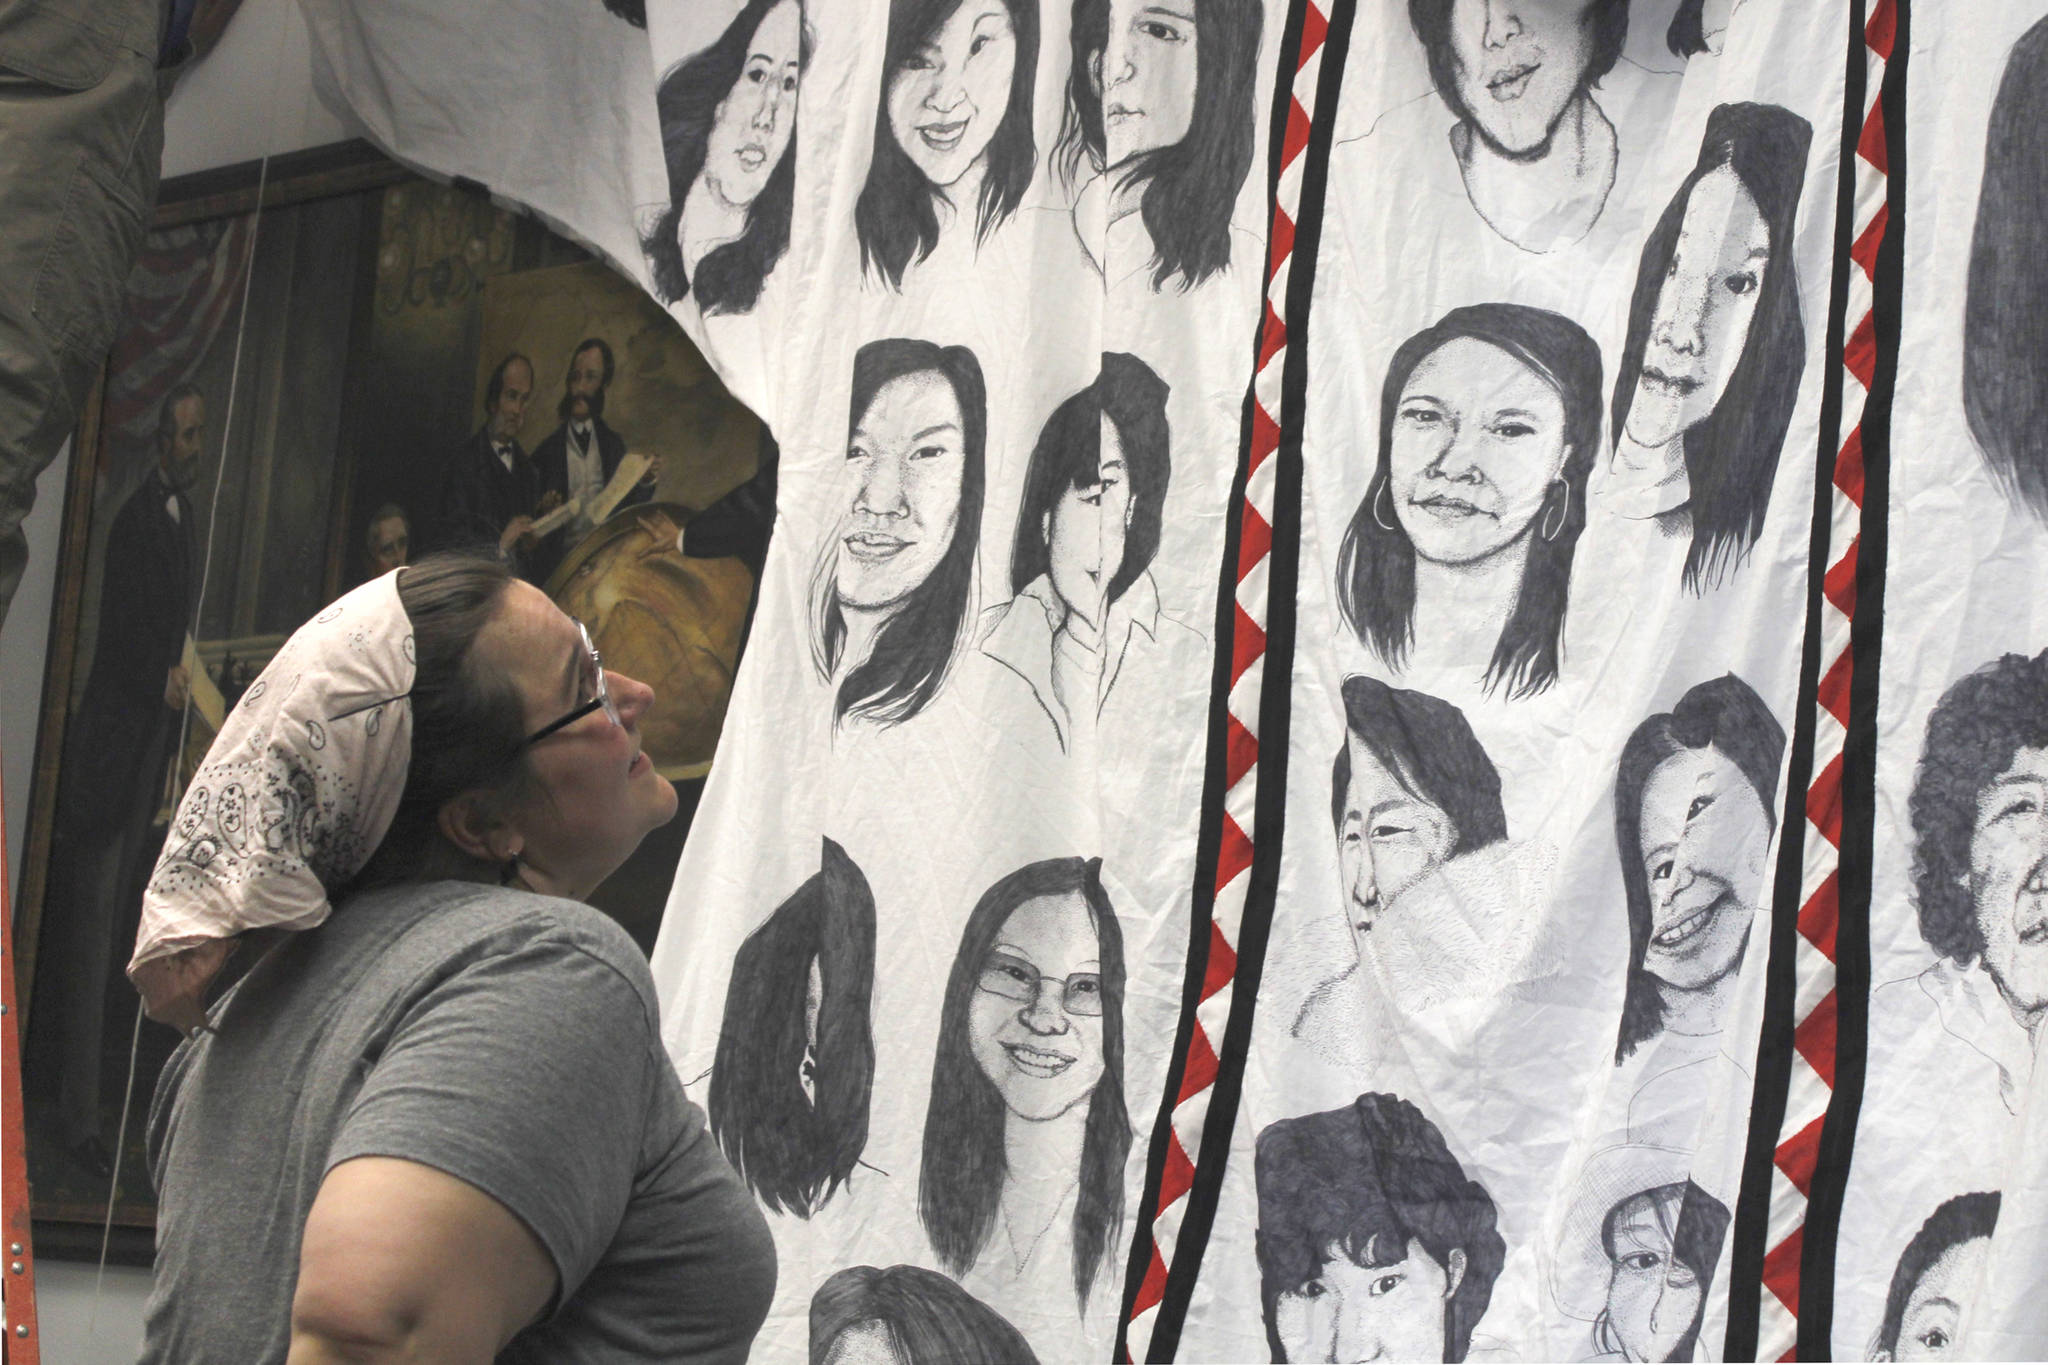 Missing, murdered women: Artist tries to make crisis feel real